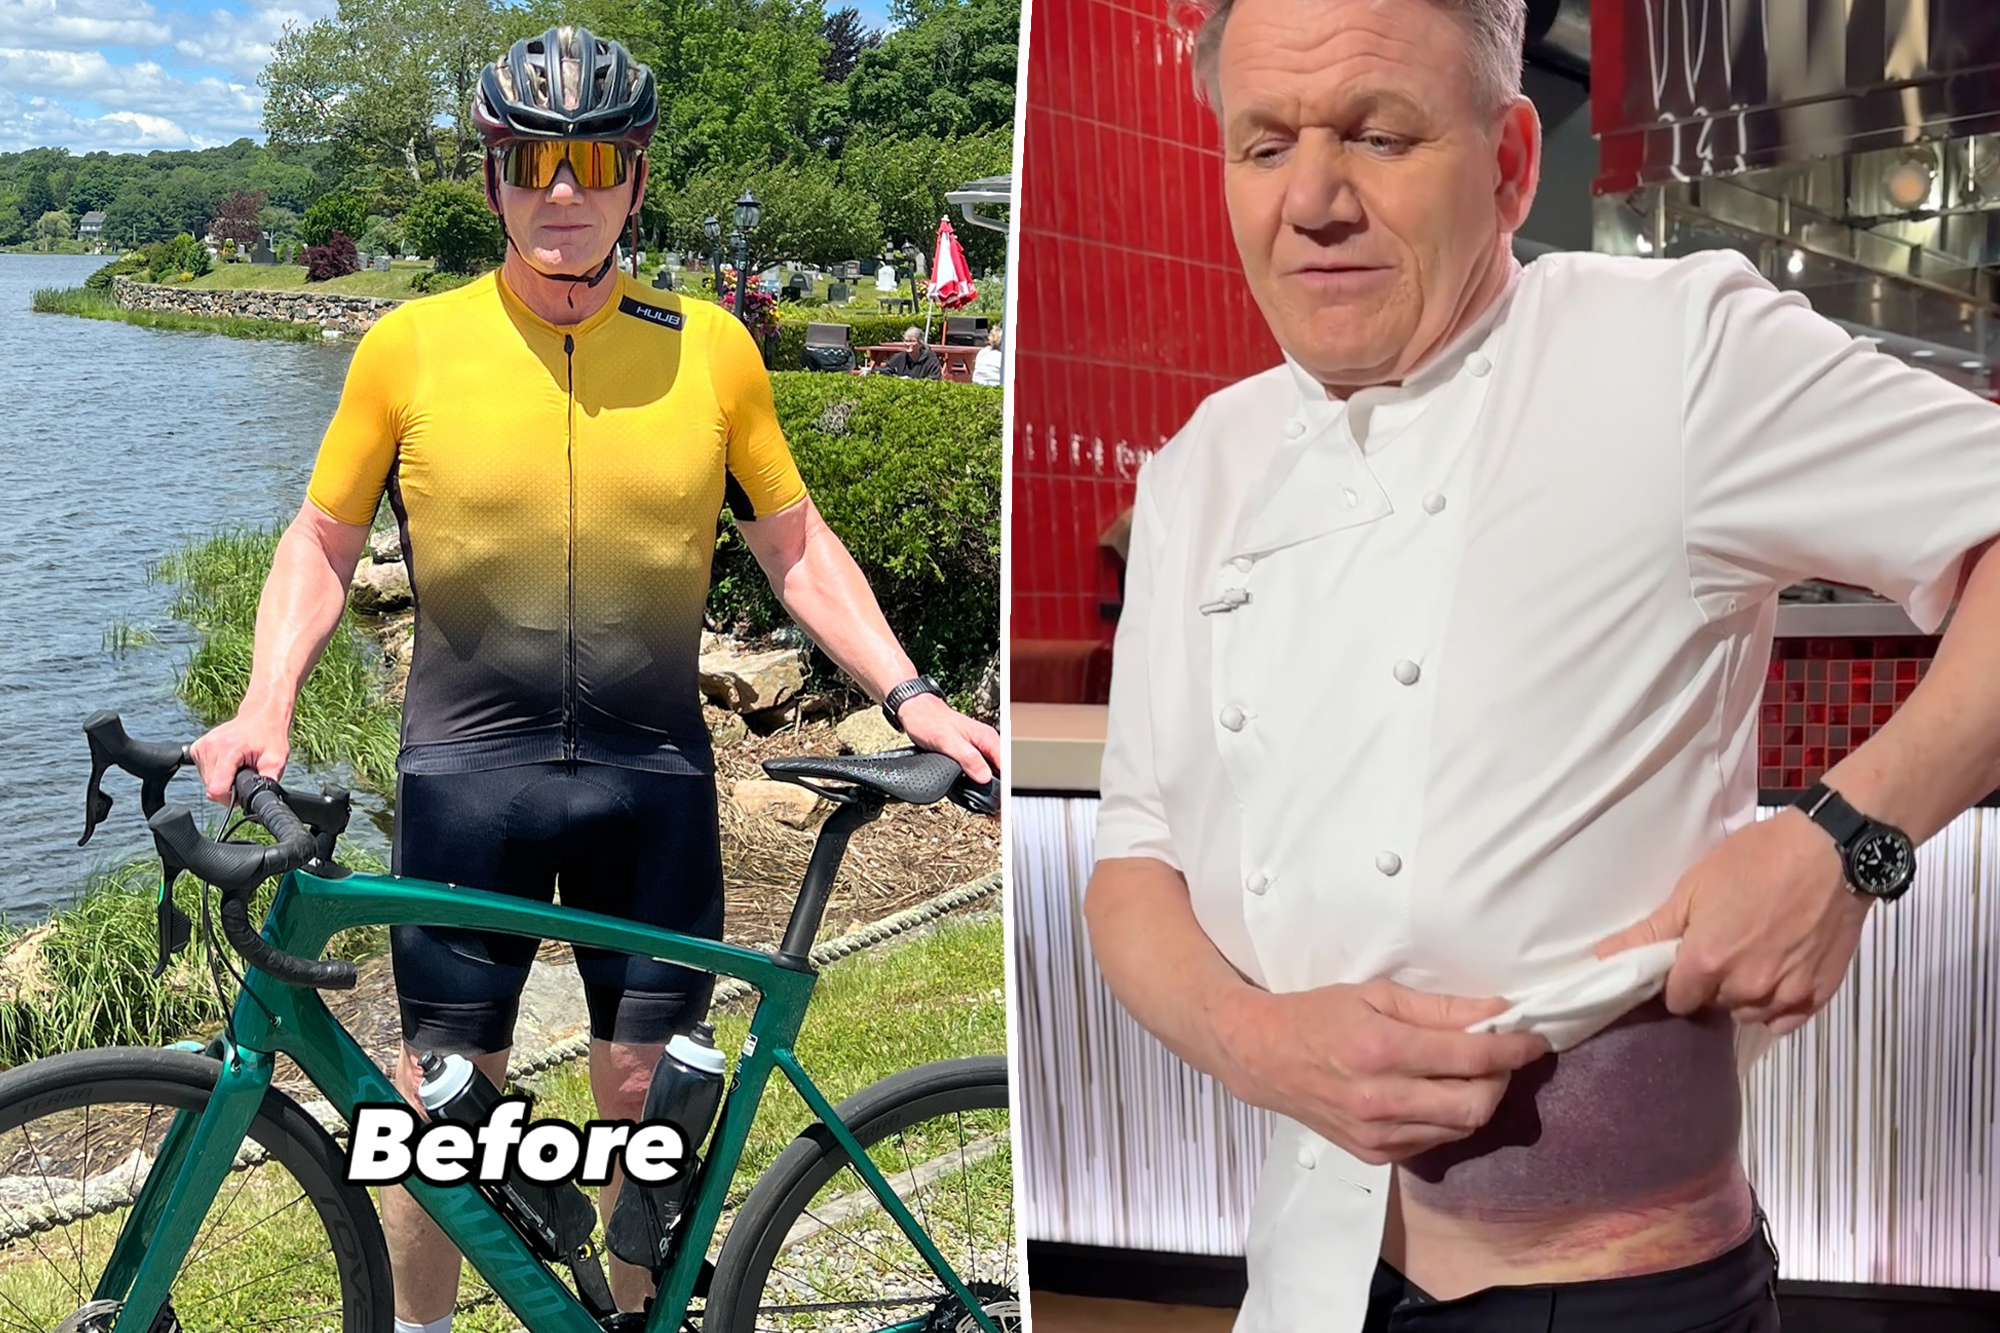 Gordon Ramsay's Terrifying Bike Accident: A Chef's Close Call and Valuable Lesson